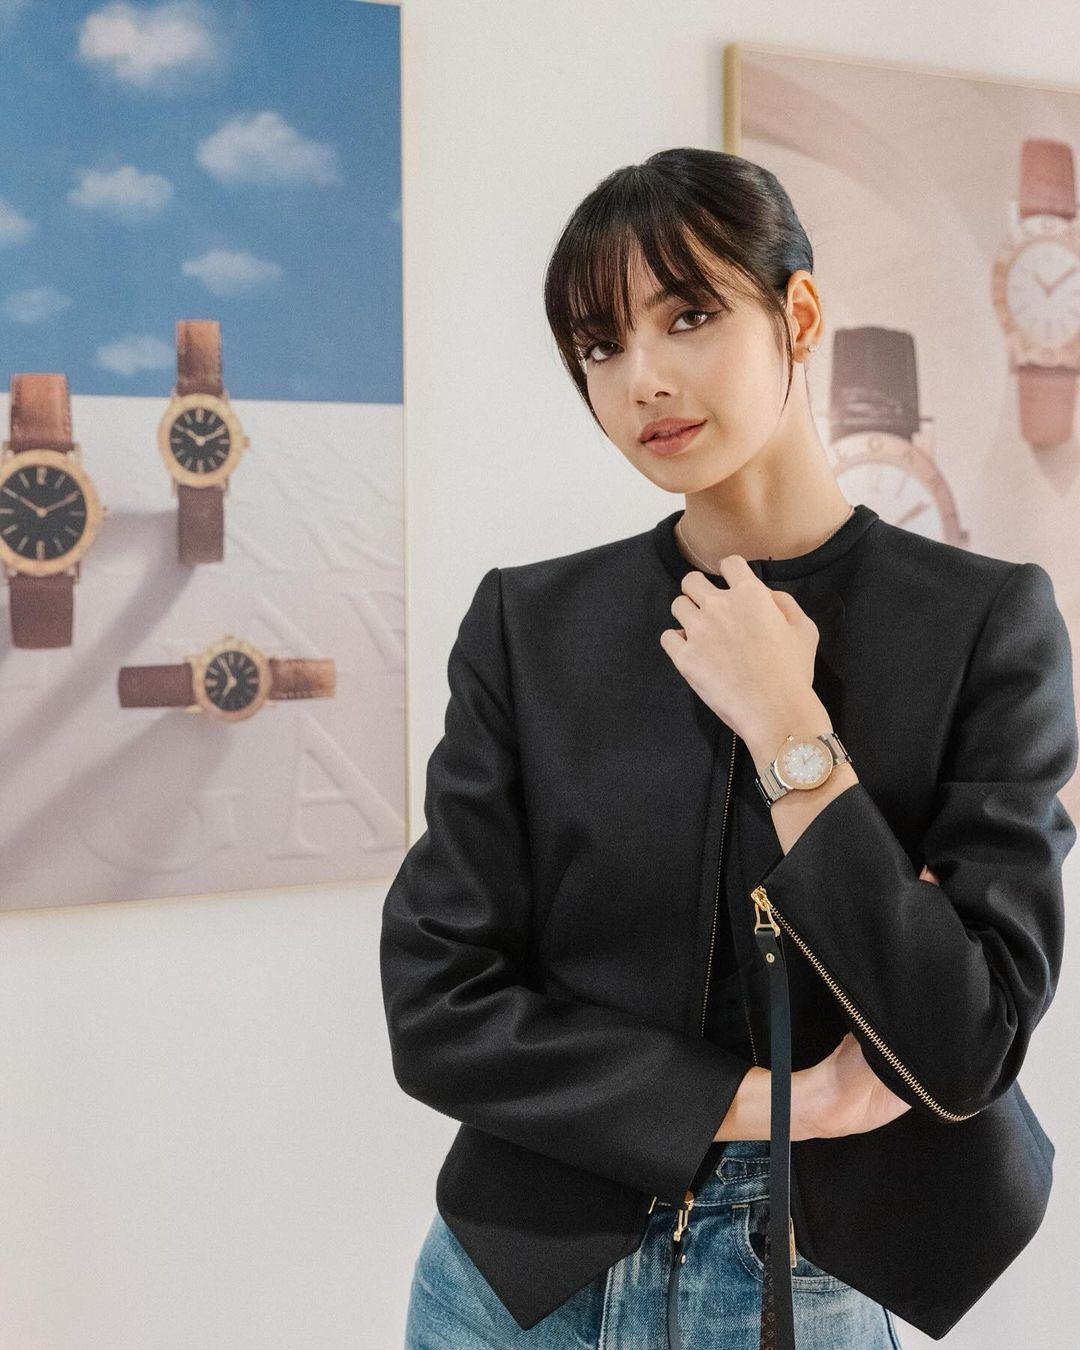 My 2nd BB watch collaboration with @bulgari Super excited to be a part of making this amazing piece. #LVMHWatchWeek #Bulgari #BulgariWatches